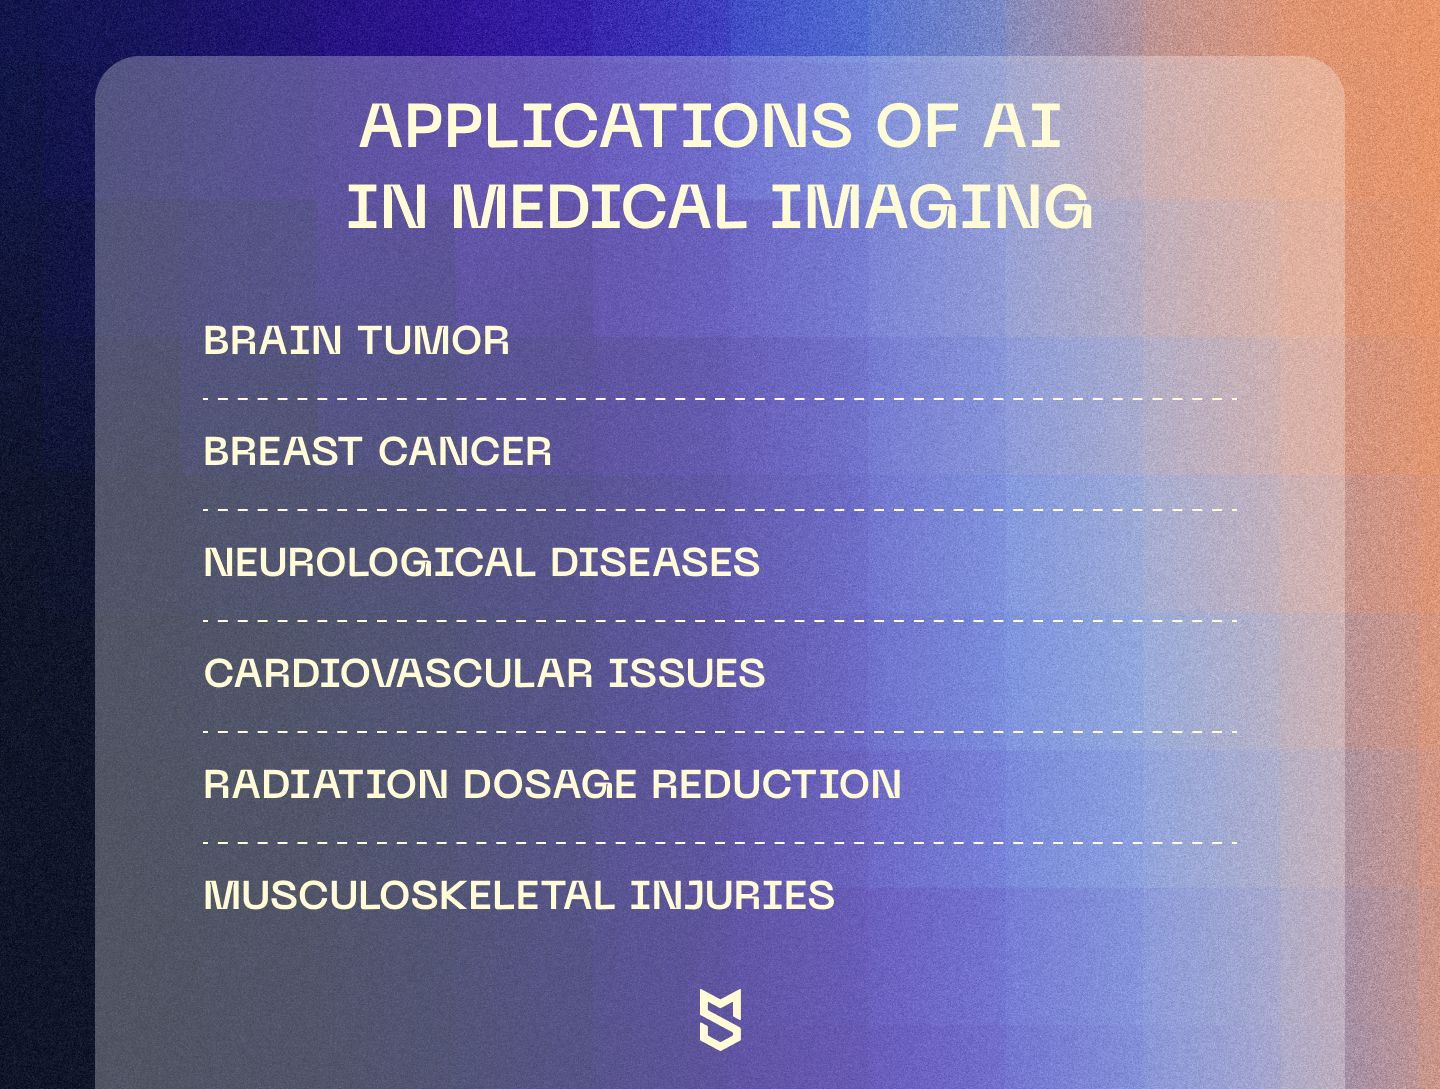 Applications of AI in medical imaging